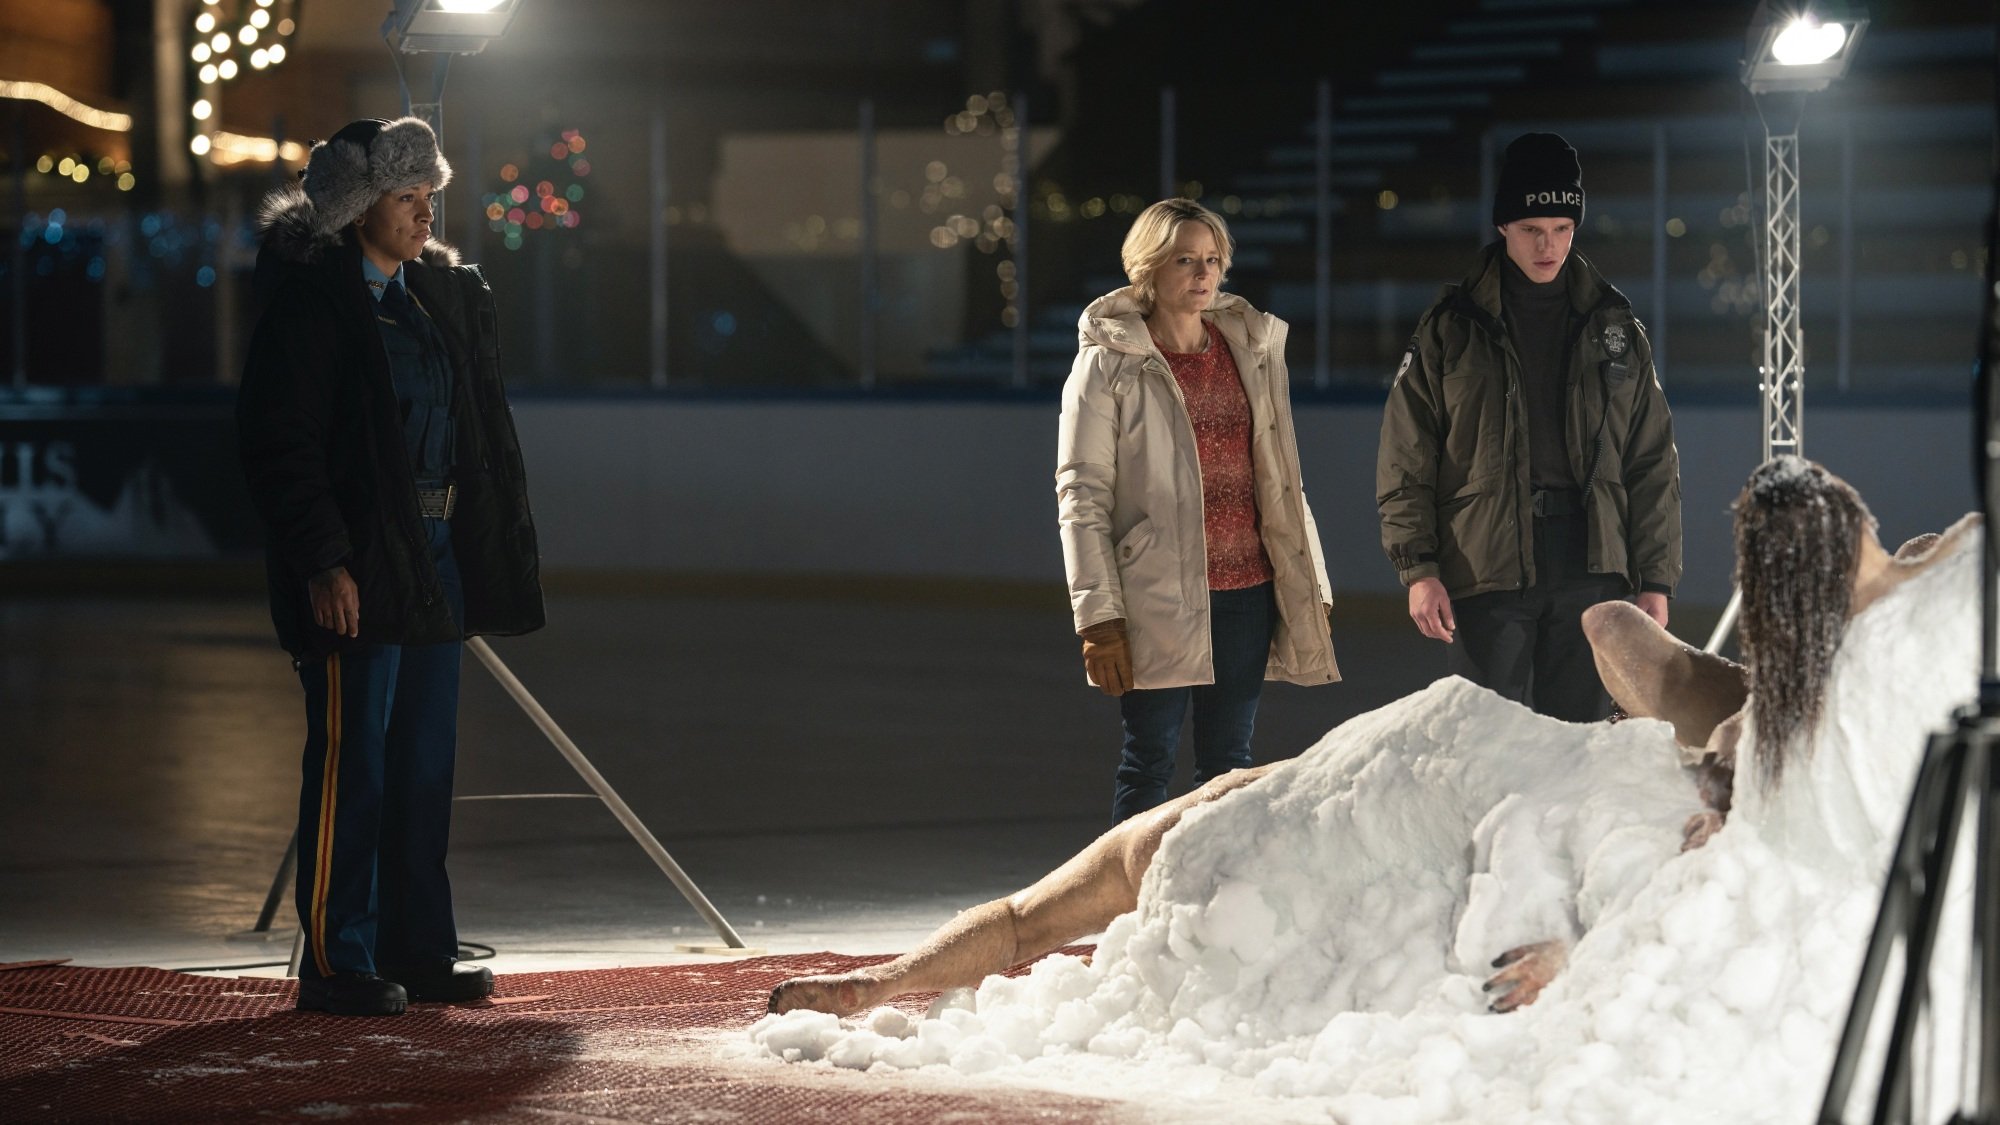 Two women and one man in police uniforms inspect a frozen clump of bodies thawing on an ice rink.